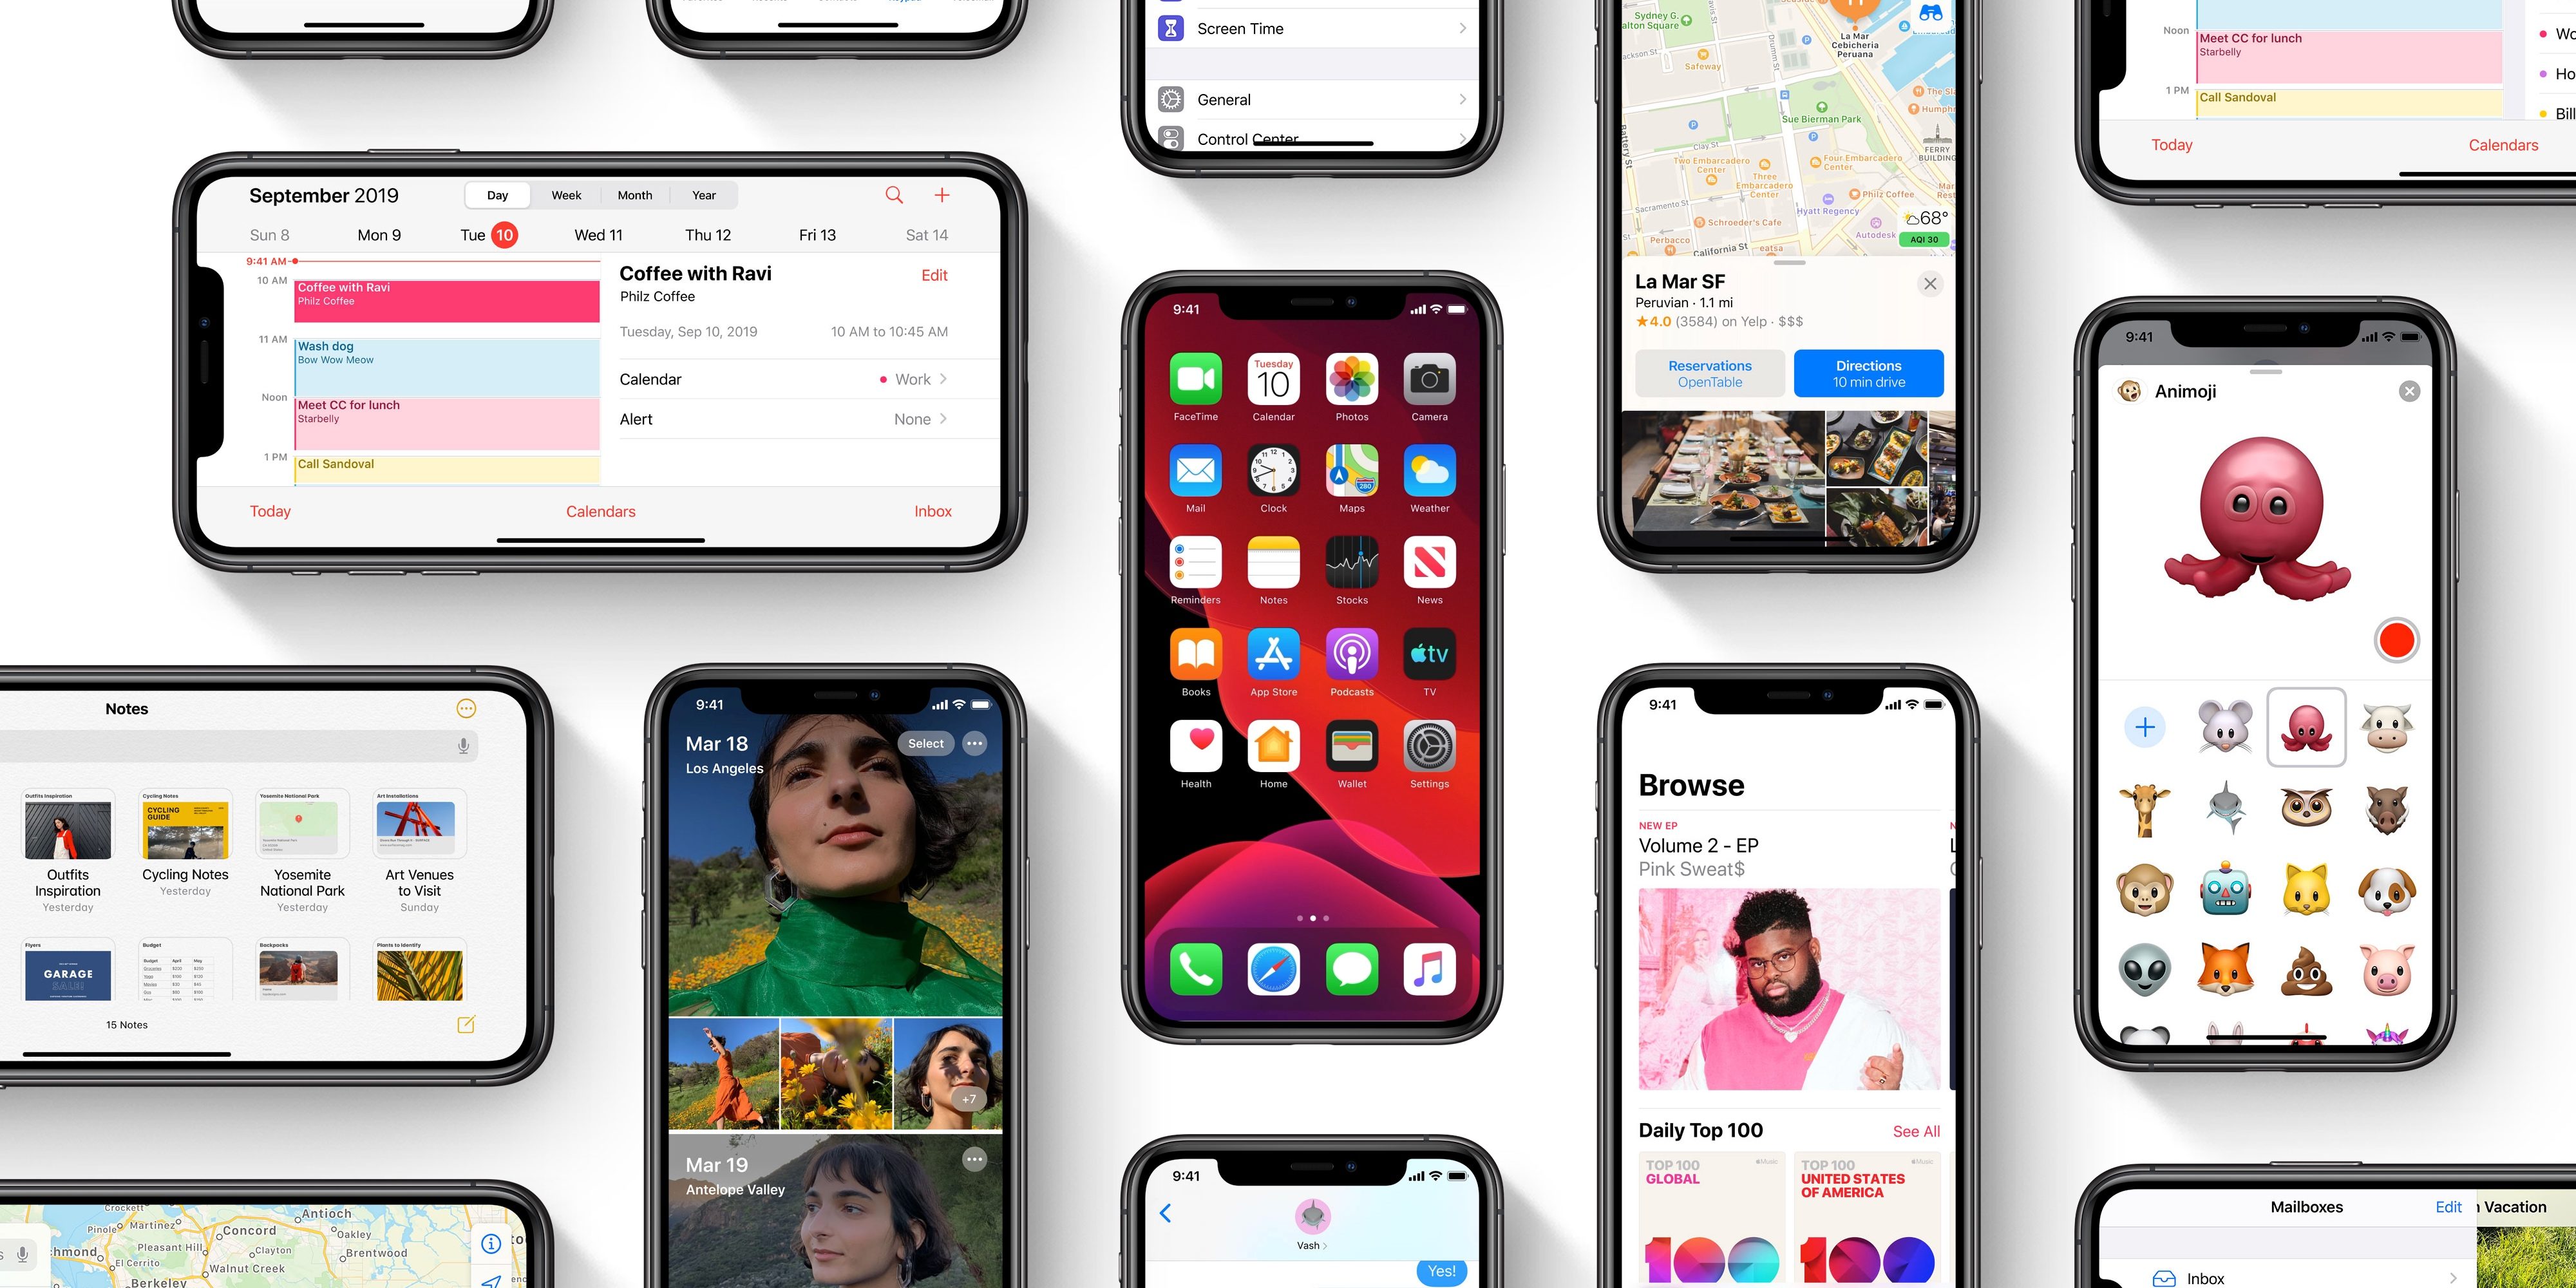 Top 5 New Features Of iOS 13.4 for iPhone and iPad